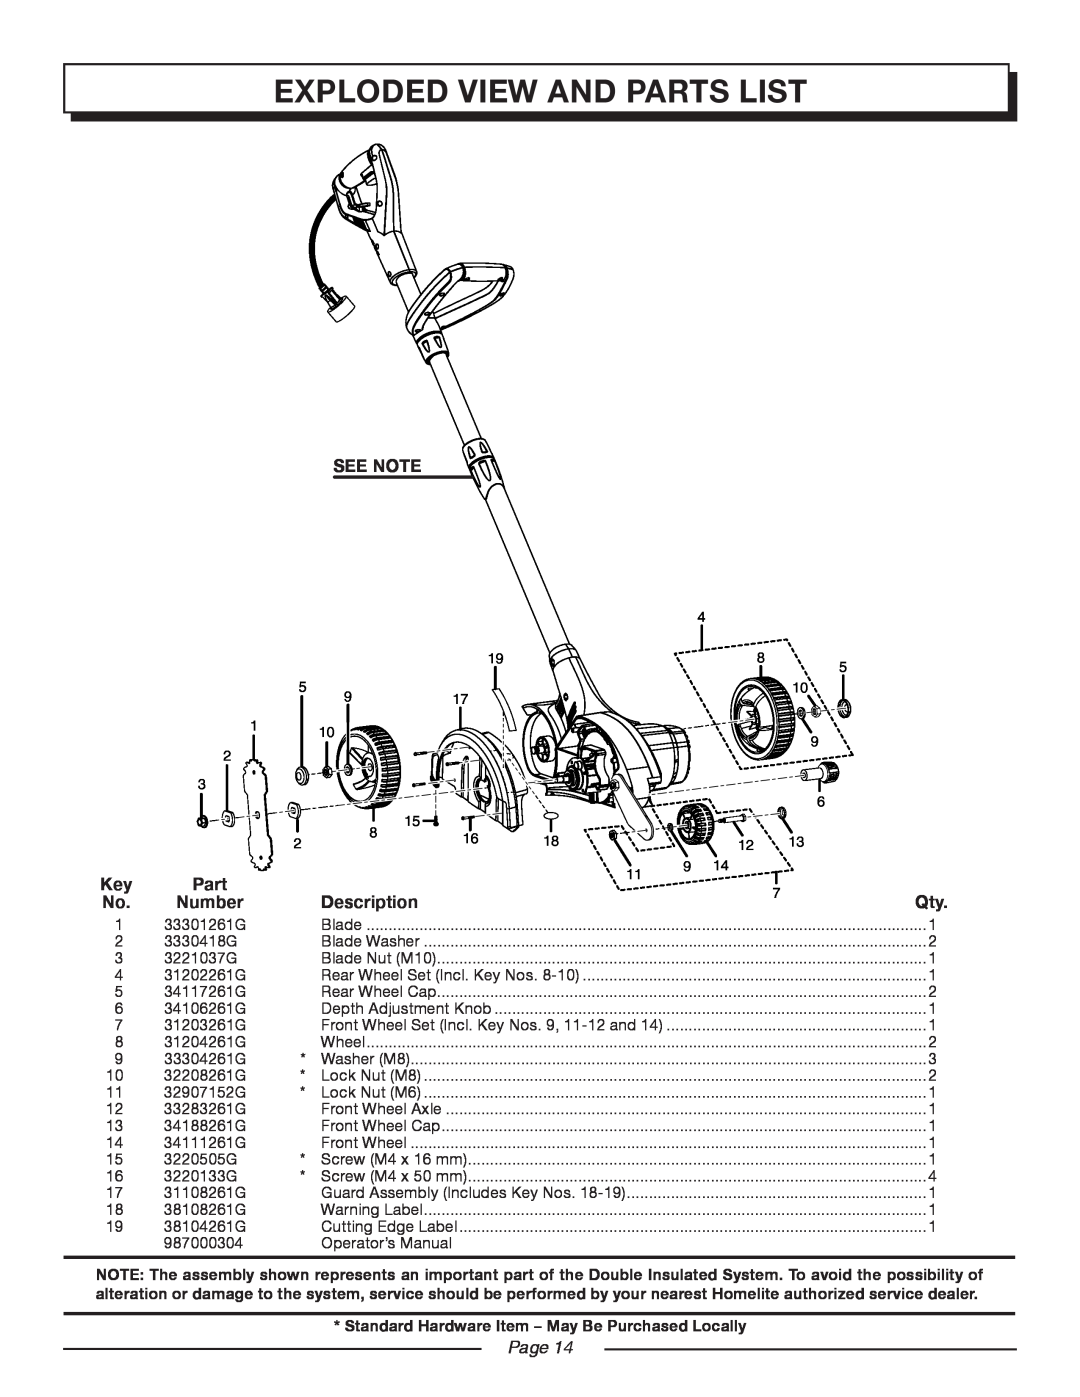 Homelite UT45100 manual Exploded View And Parts List, See Note, Number, Description, 7Qty, Page 